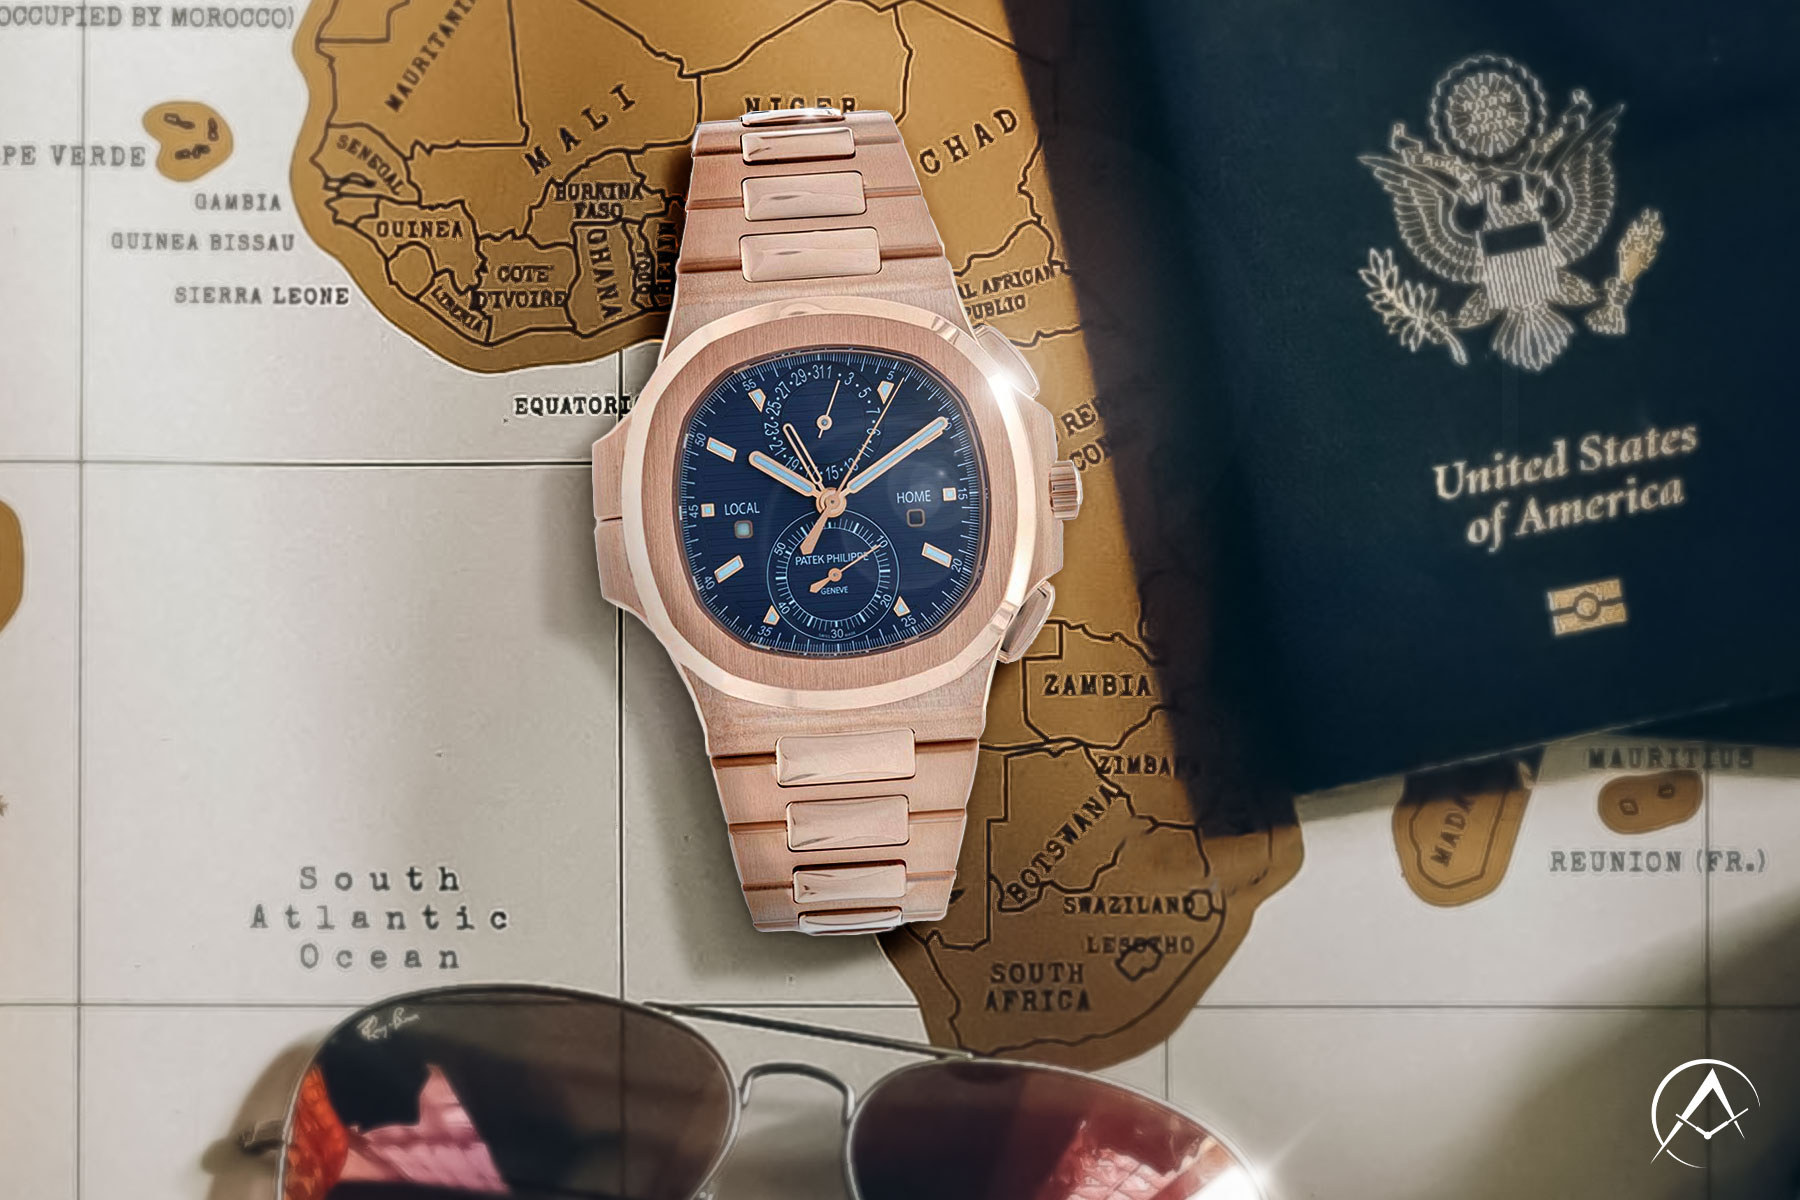 Rose Gold Patek Philippe Dual Time Watch with Blue Dial Sits on a Map Beside a Passport and Aviator Sunglasses.